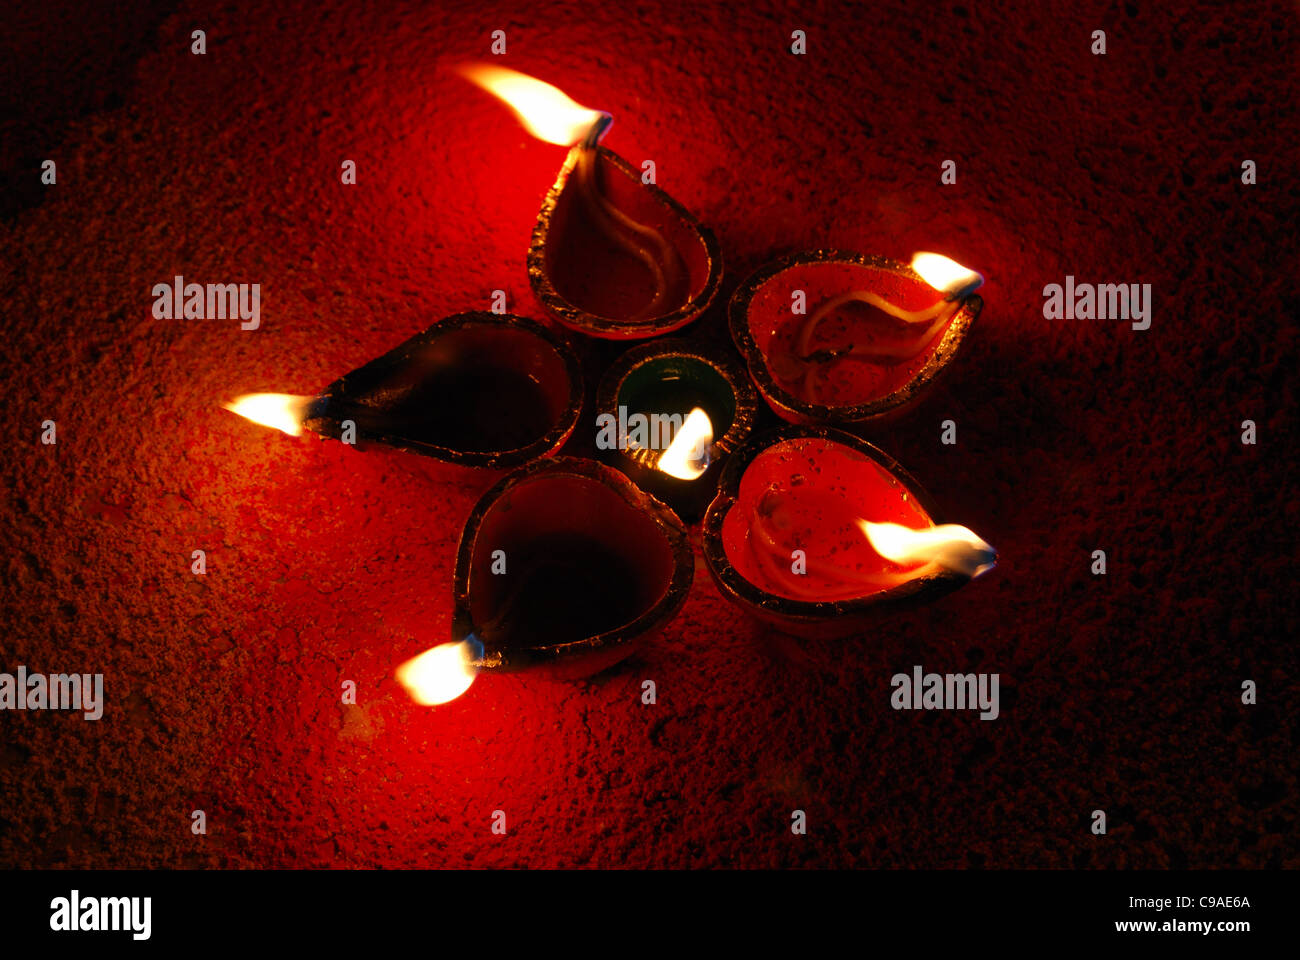 A design made by earthen lamp on the occassion of Diwali, the festival of light, India Stock Photo